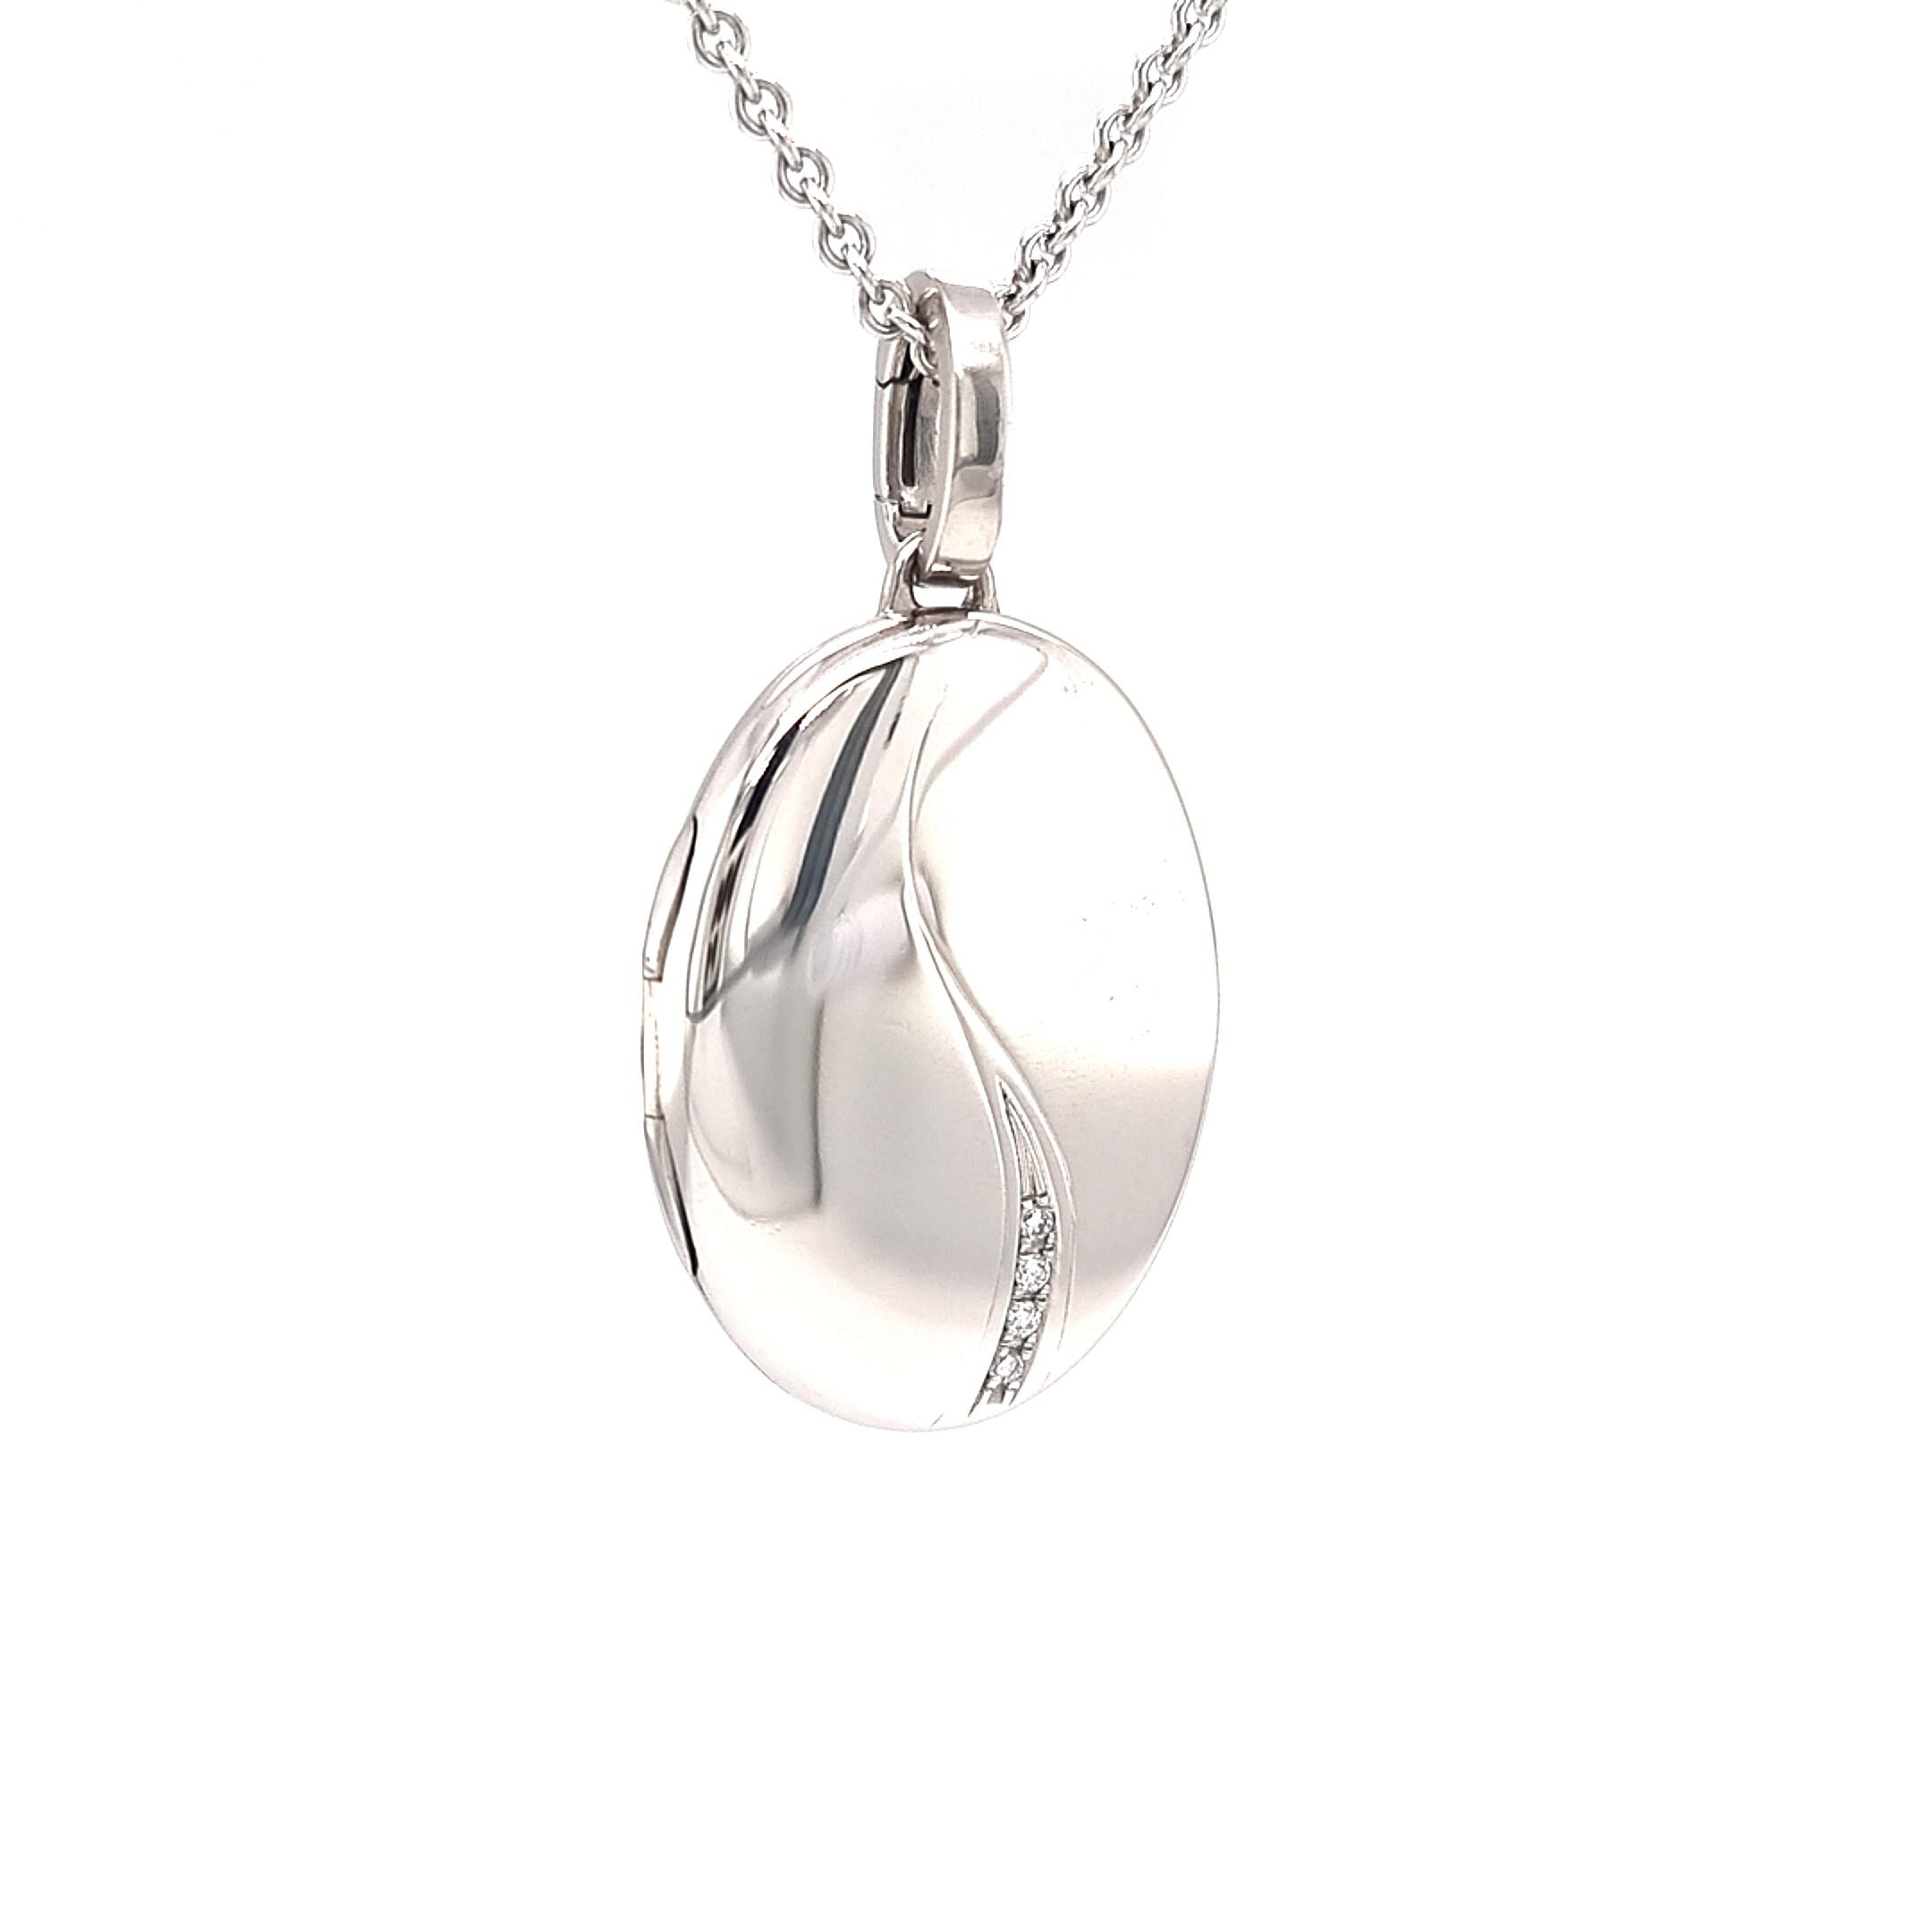 Oval locket pendant necklace, Hallmark Collection by VICTOR MAYER, 18k white gold, solid version, 4 diamonds, total 0.04 ct, H VS with two picture frames, made in Germany

About the creator Victor Mayer
Victor Mayer is internationally renowned for